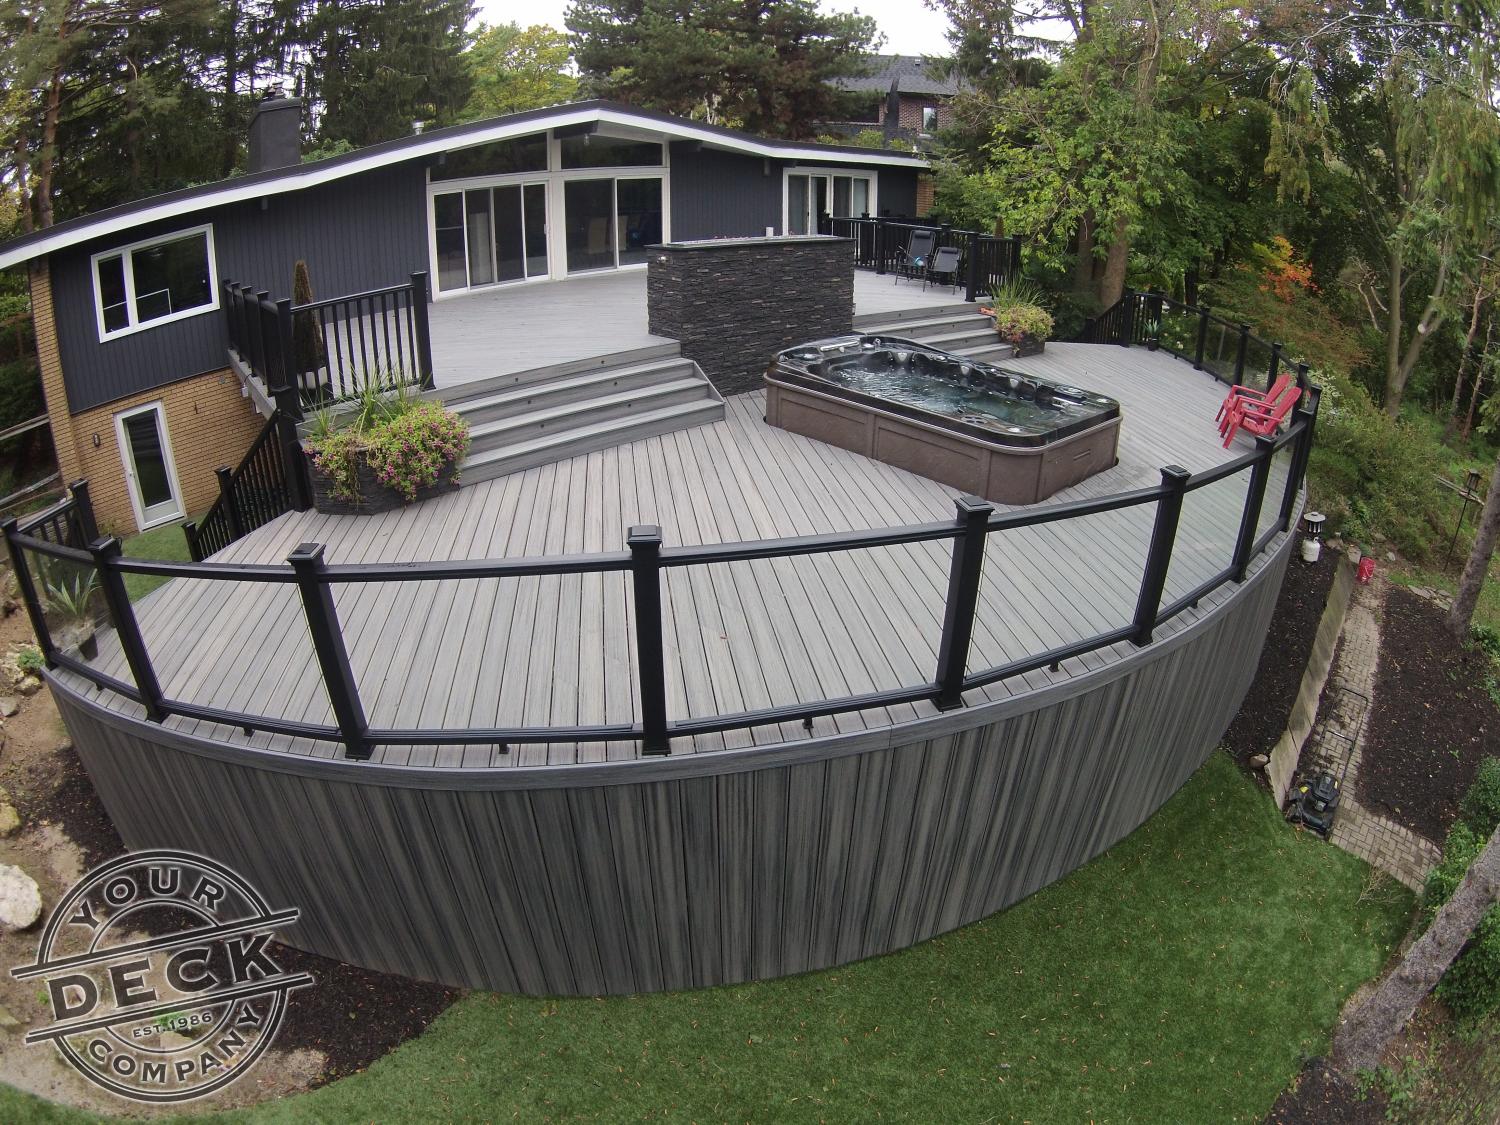 Trex Deck constructed by Your Deck Company